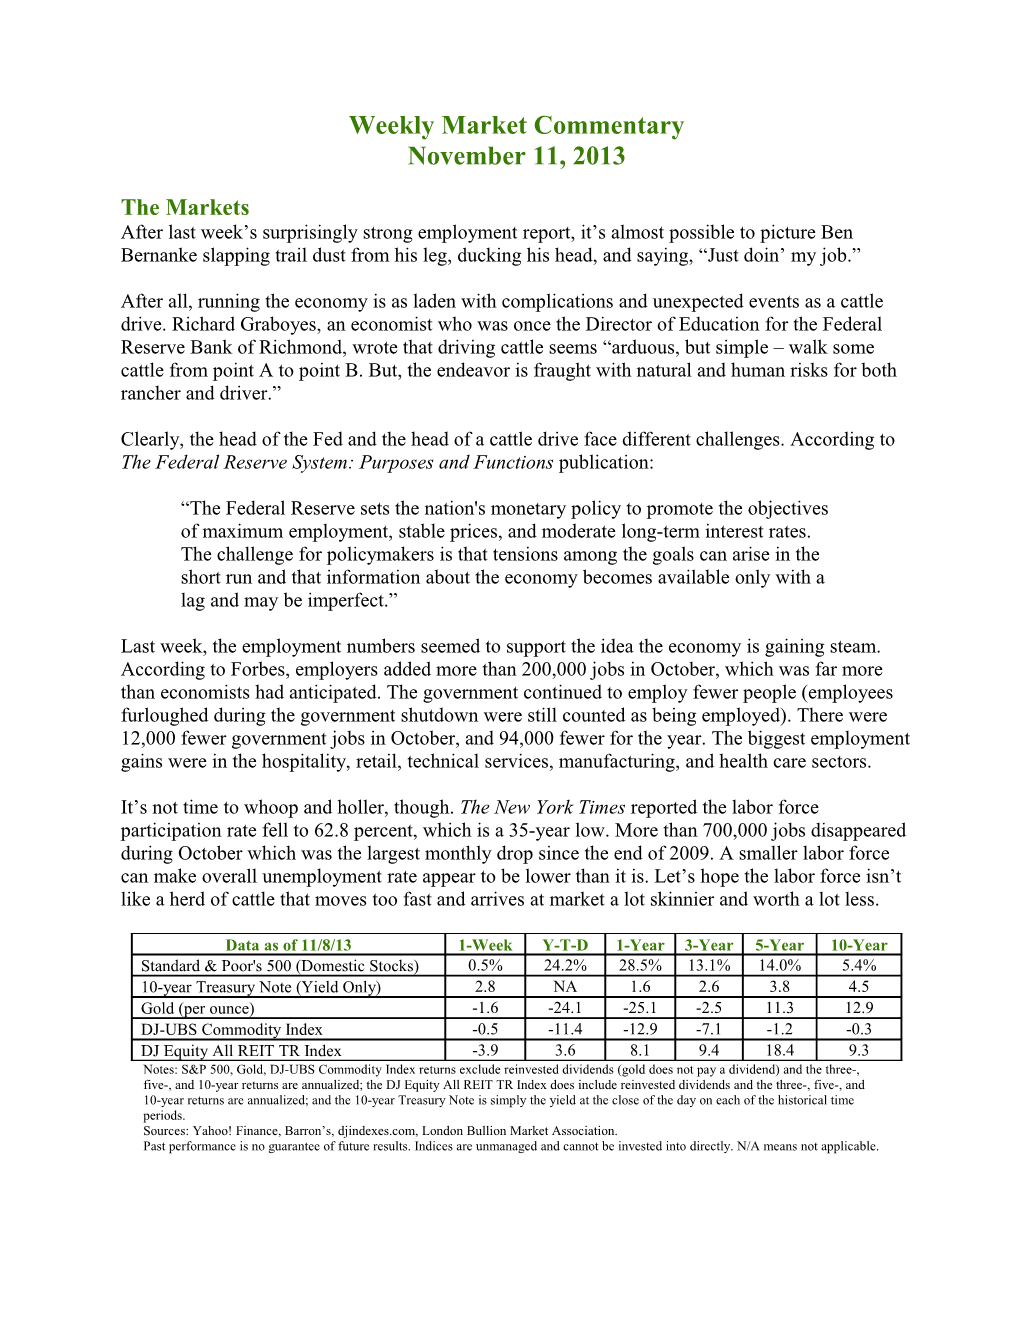 Weekly Commentary 11-11-13 PAA